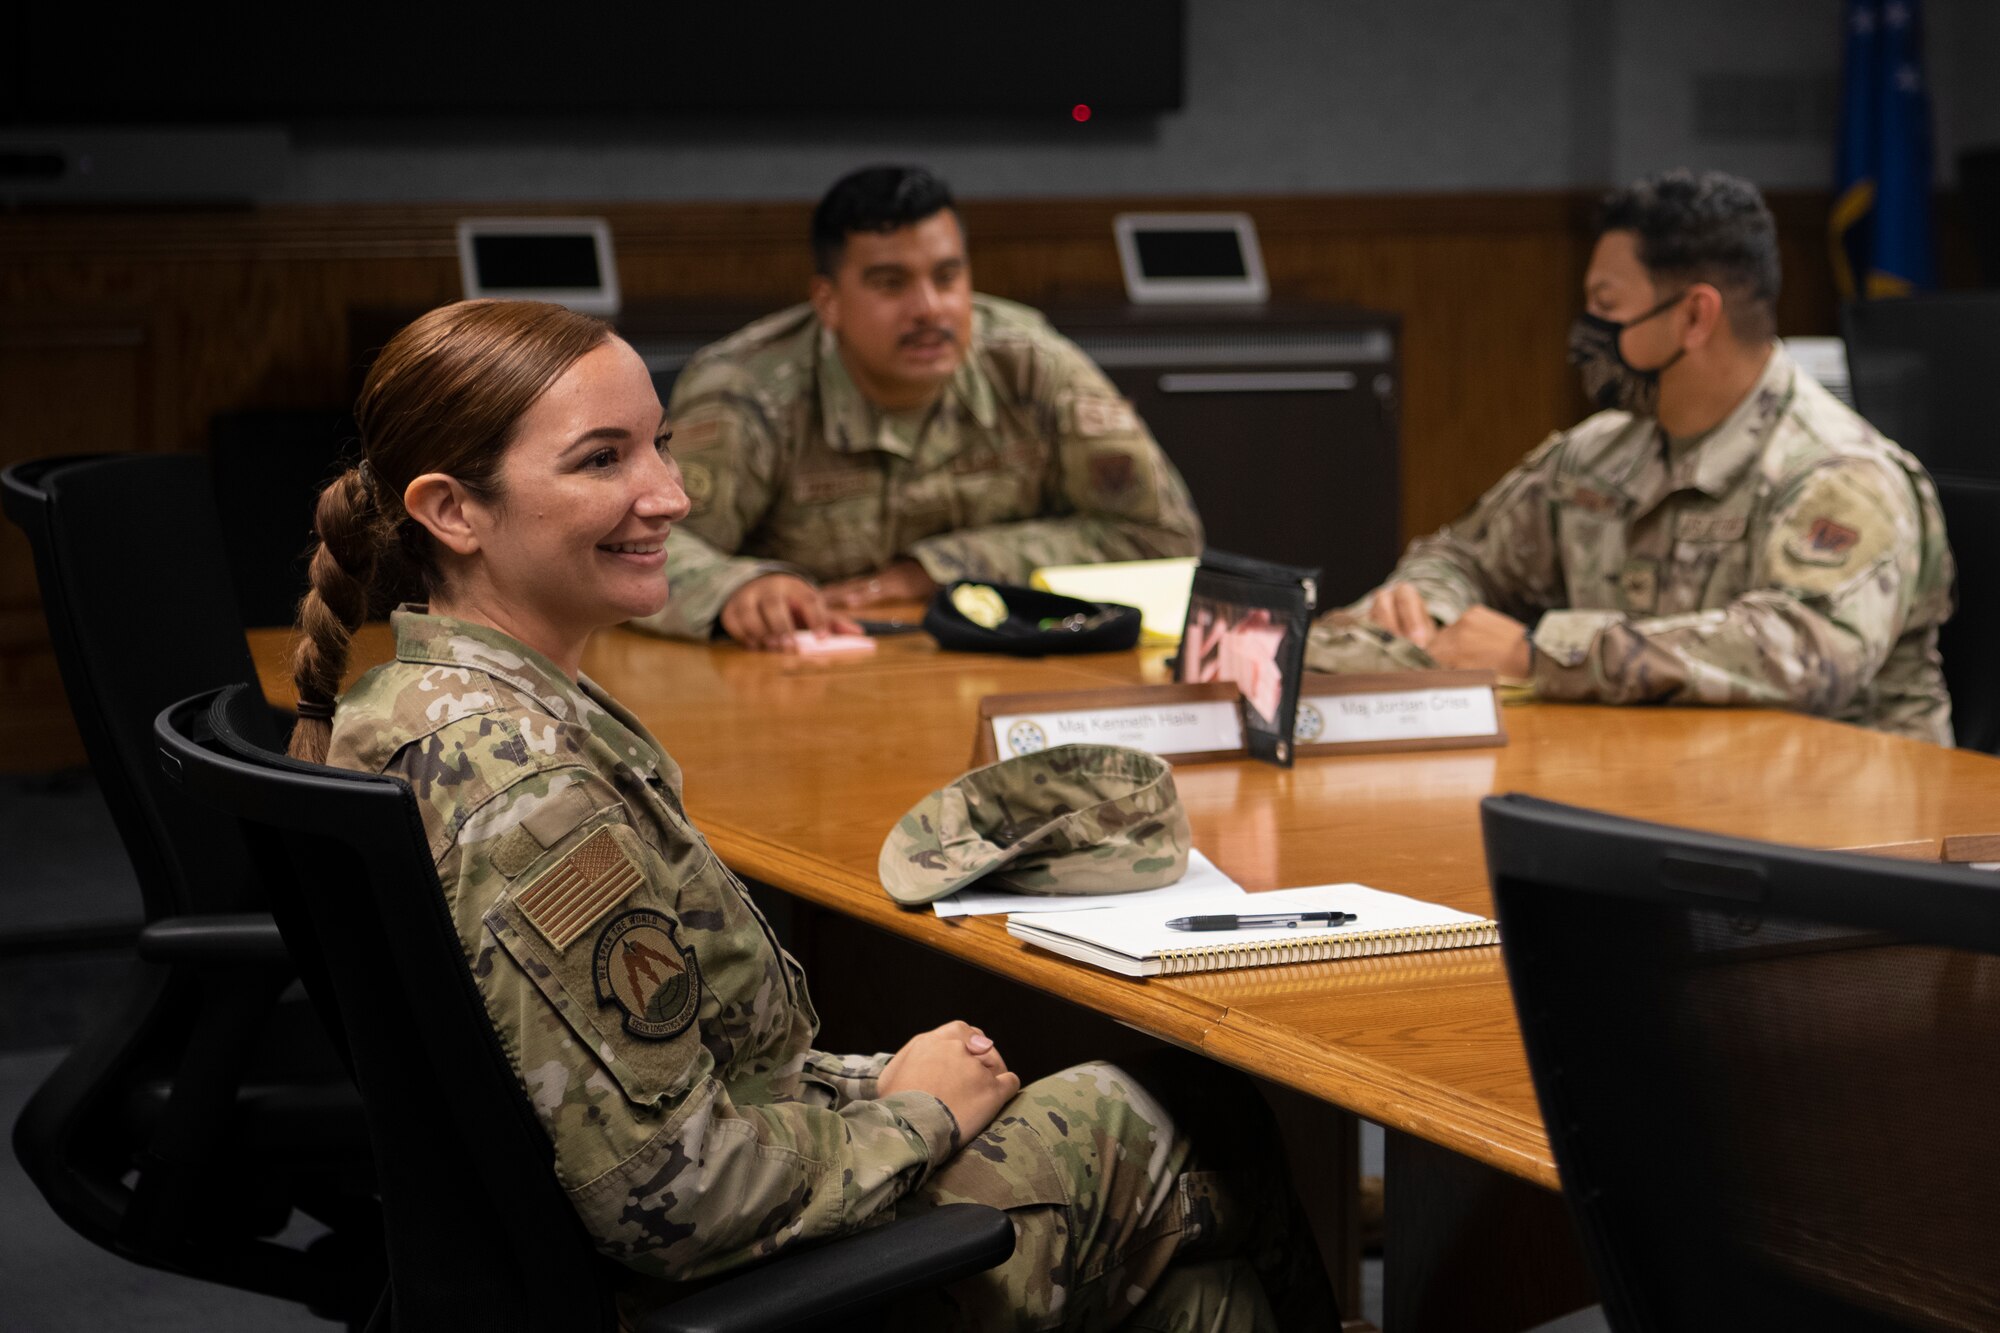 U.S. Air Force Tech. Sgt. Maria Cloherty, 325th Logistics Readiness Squadron equipment accountability noncommissioned officer in charge, left, converses with Airmen during a Hispanic Heritage Association meeting at Tyndall Air Force Base, Florida, June 30, 2021.